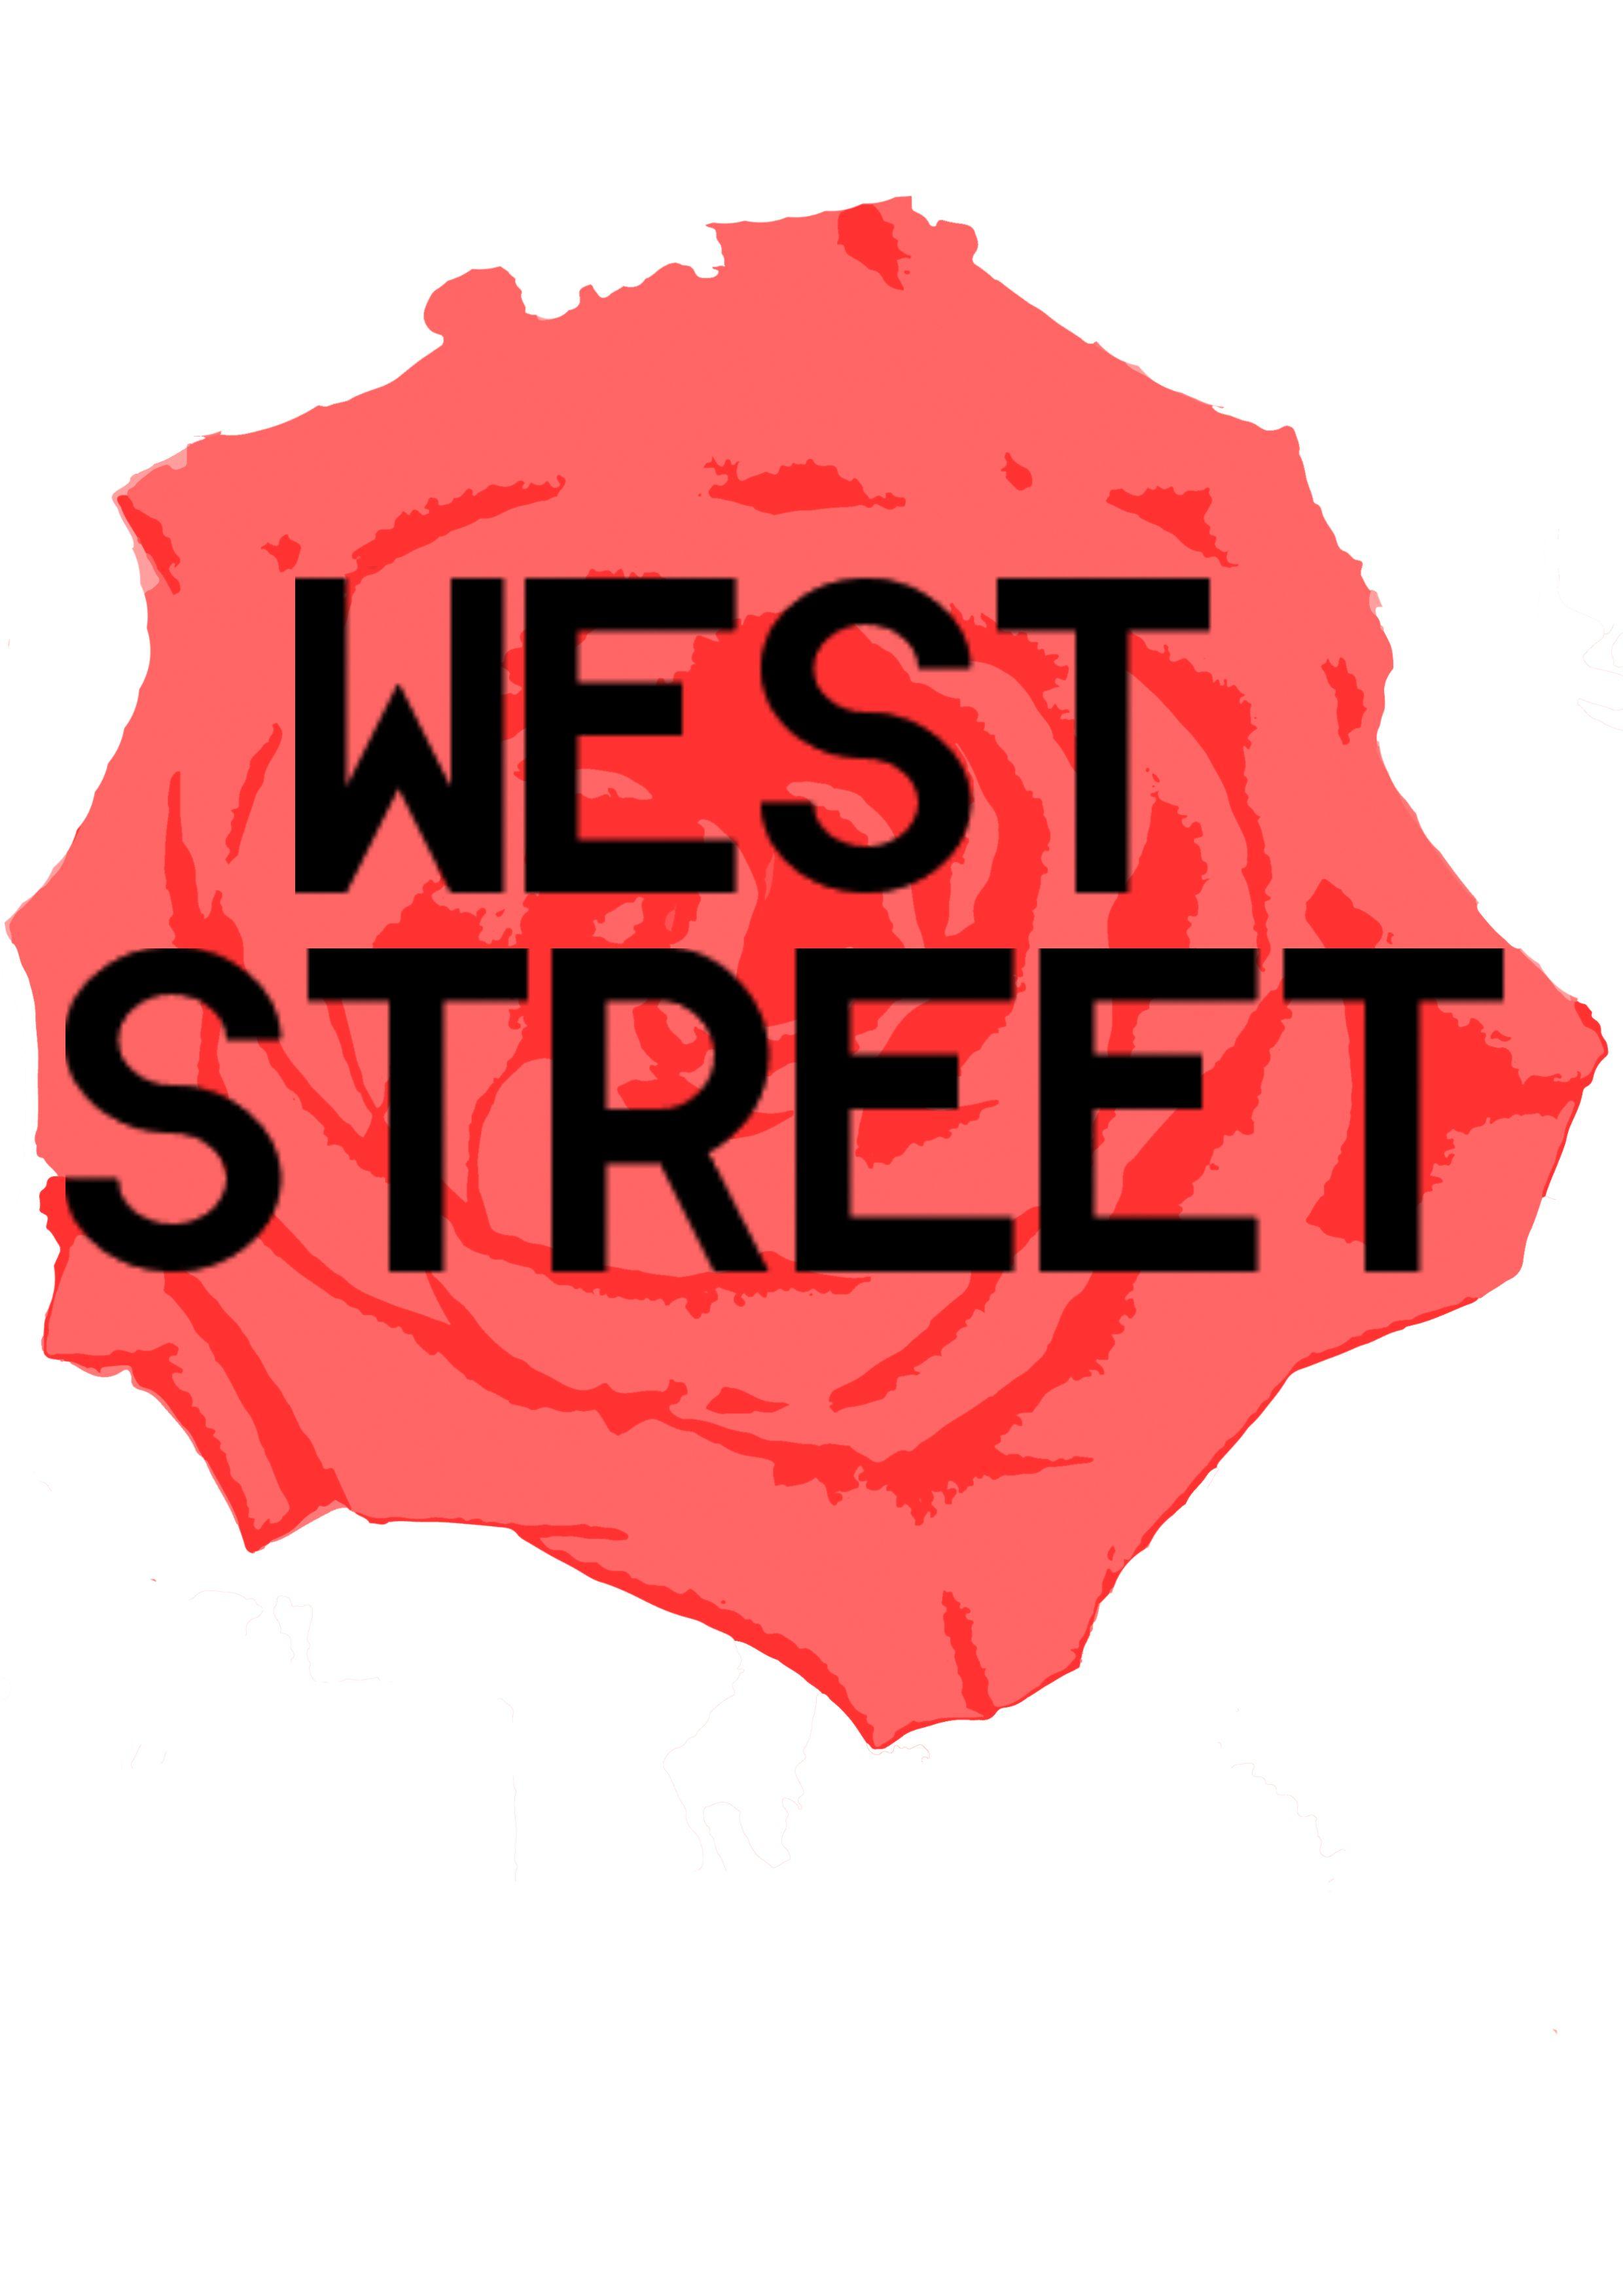 Rose Clothing Logo - Personal clothing brand logo. West Street with red rose logo | New ...